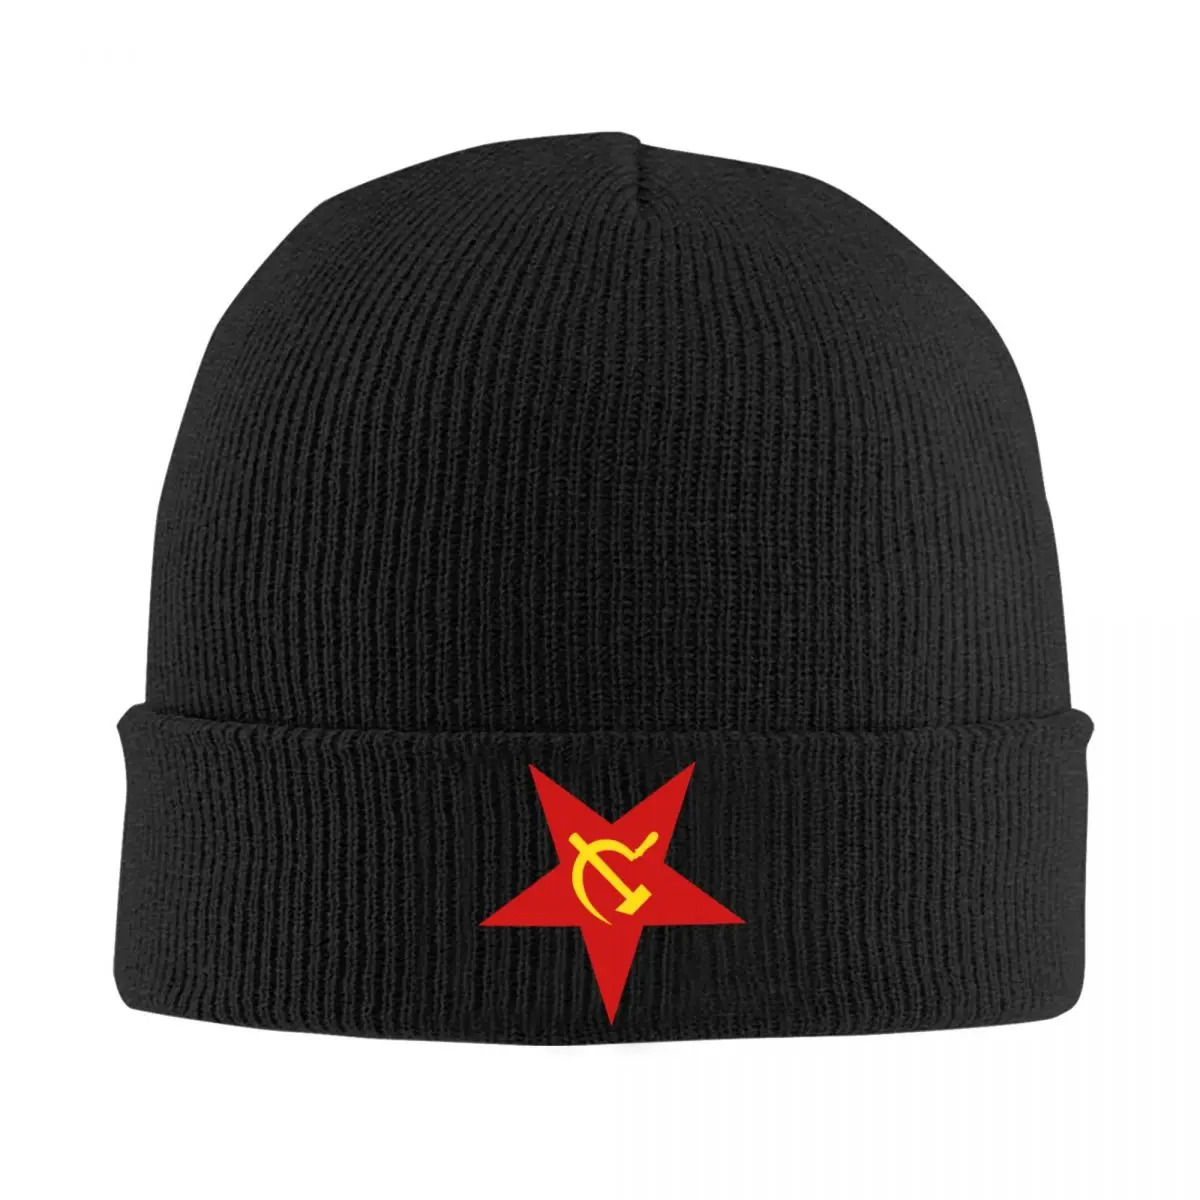 

Soviet Union Red Star Hammer And Sickle Bonnet Hat Knitted Hat Unisex Adult CCCP USSR Flag Warm Winter Skullies Beanies Caps